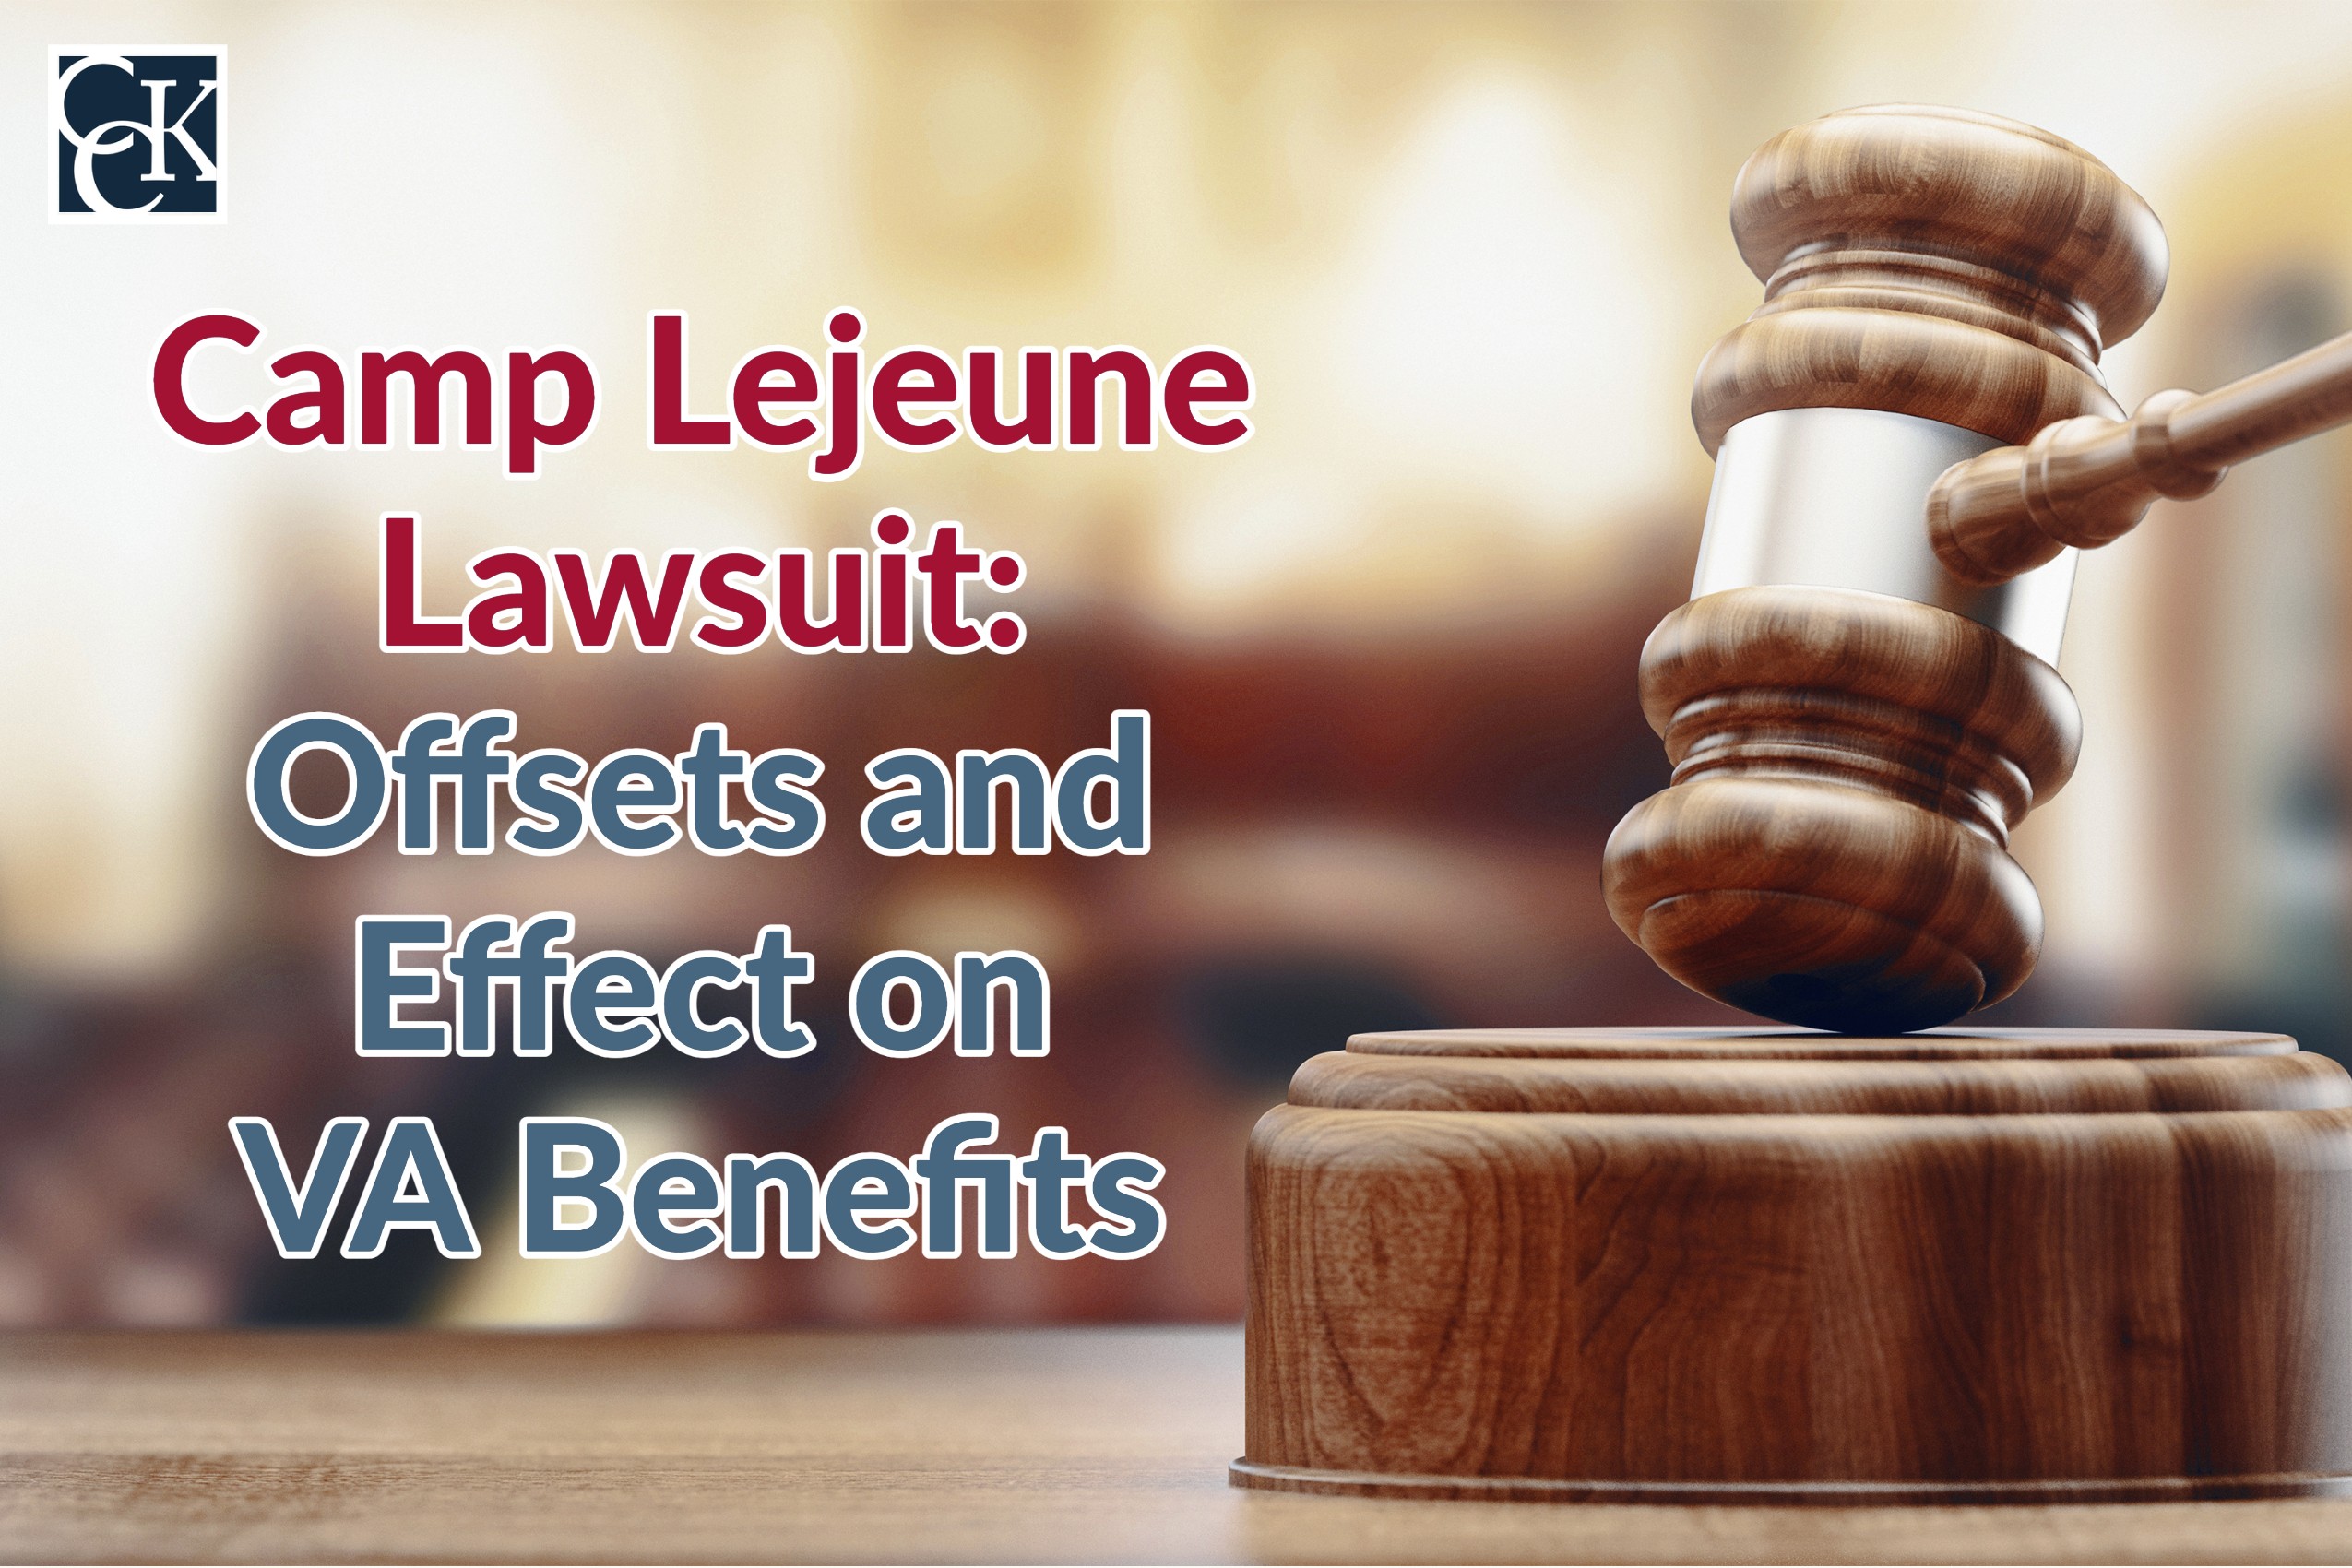 How to File a Camp Lejeune Lawsuit